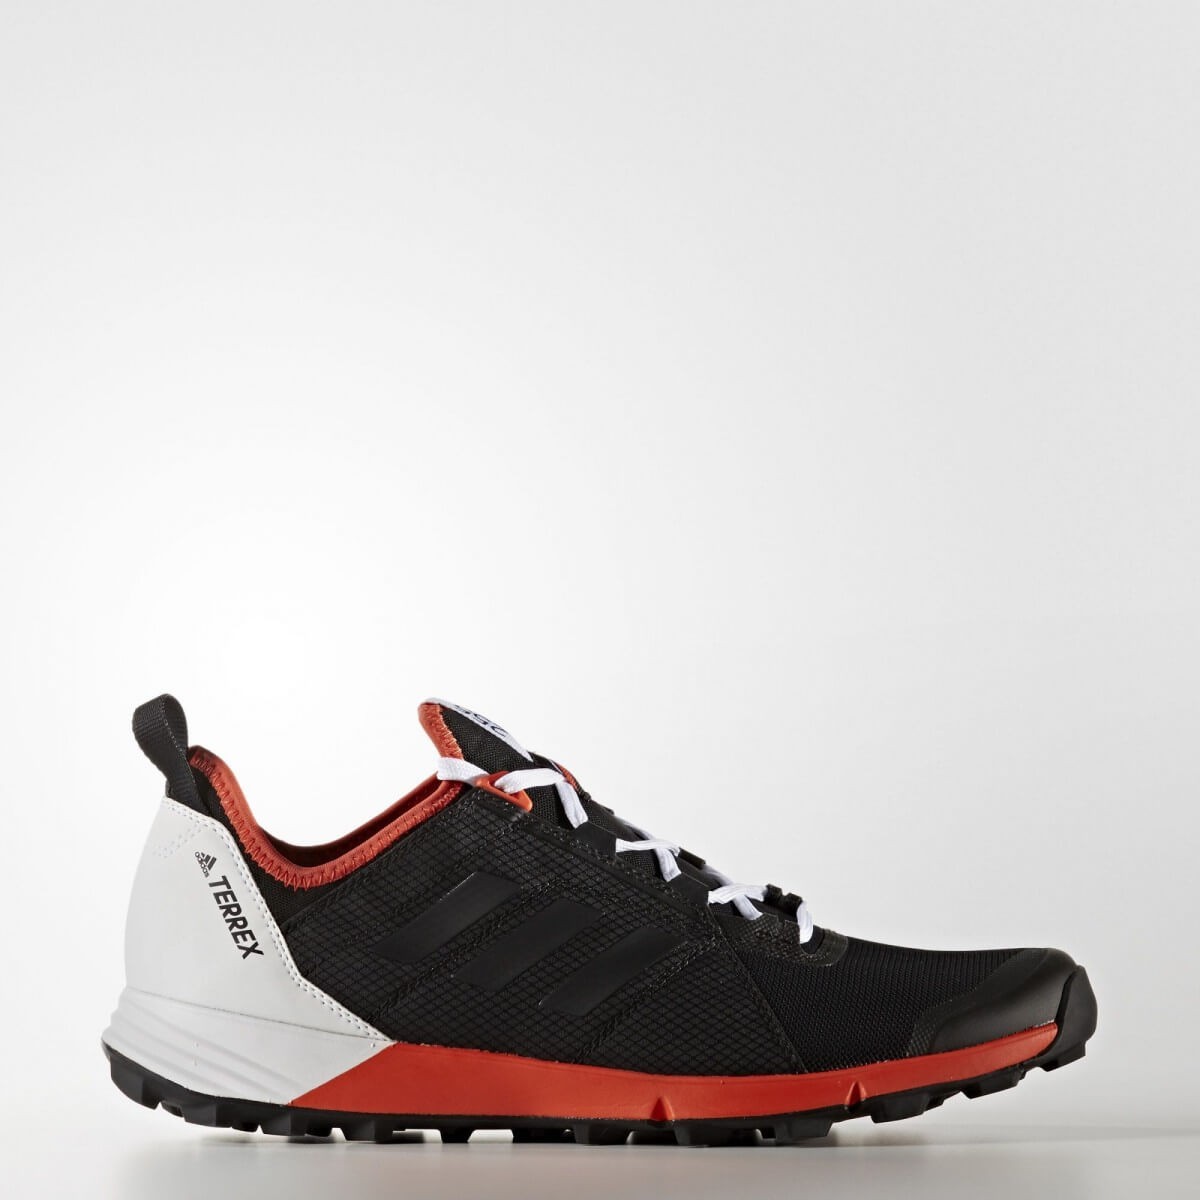 Adidas Trail Terrex Agravic Speed AW17 color black / red